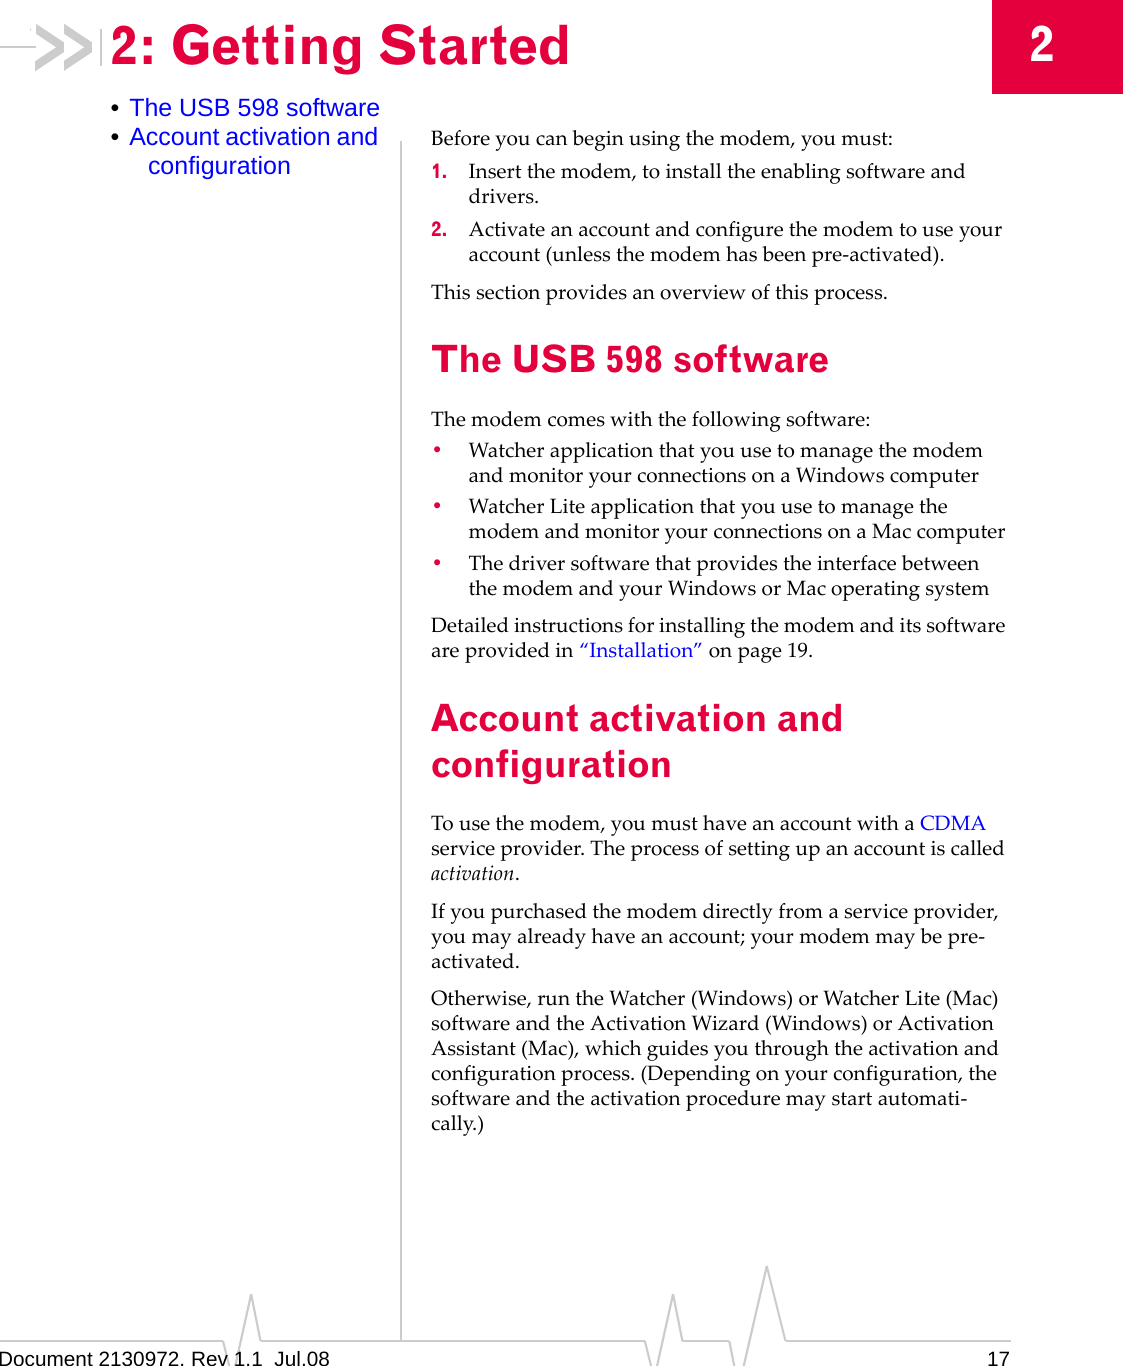 Document 2130972. Rev 1.1  Jul.08 1722: Getting Started•The USB 598 software•Account activation and configurationBeforeyoucanbeginusingthemodem,youmust:1. Insertthemodem,toinstalltheenablingsoftwareanddrivers.2. Activateanaccountandconfigurethemodemtouseyouraccount(unlessthemodemhasbeenpre‐activated).Thissectionprovidesanoverviewofthisprocess.The USB 598 softwareThemodemcomeswiththefollowingsoftware:•WatcherapplicationthatyouusetomanagethemodemandmonitoryourconnectionsonaWindowscomputer•WatcherLiteapplicationthatyouusetomanagethemodemandmonitoryourconnectionsonaMaccomputer•ThedriversoftwarethatprovidestheinterfacebetweenthemodemandyourWindowsorMacoperatingsystemDetailedinstructionsforinstallingthemodemanditssoftwareareprovidedin“Installation”onpage 19.Account activation and configurationTousethemodem,youmusthaveanaccountwithaCDMAserviceprovider.Theprocessofsettingupanaccountiscalledactivation.Ifyoupurchasedthemodemdirectlyfromaserviceprovider,youmayalreadyhaveanaccount;yourmodemmaybepre‐activated.Otherwise,runtheWatcher(Windows)orWatcherLite(Mac)softwareandtheActivationWizard(Windows)orActivationAssistant(Mac),whichguidesyouthroughtheactivationandconfigurationprocess.(Dependingonyourconfiguration,thesoftwareandtheactivationproceduremaystartautomati‐cally.)